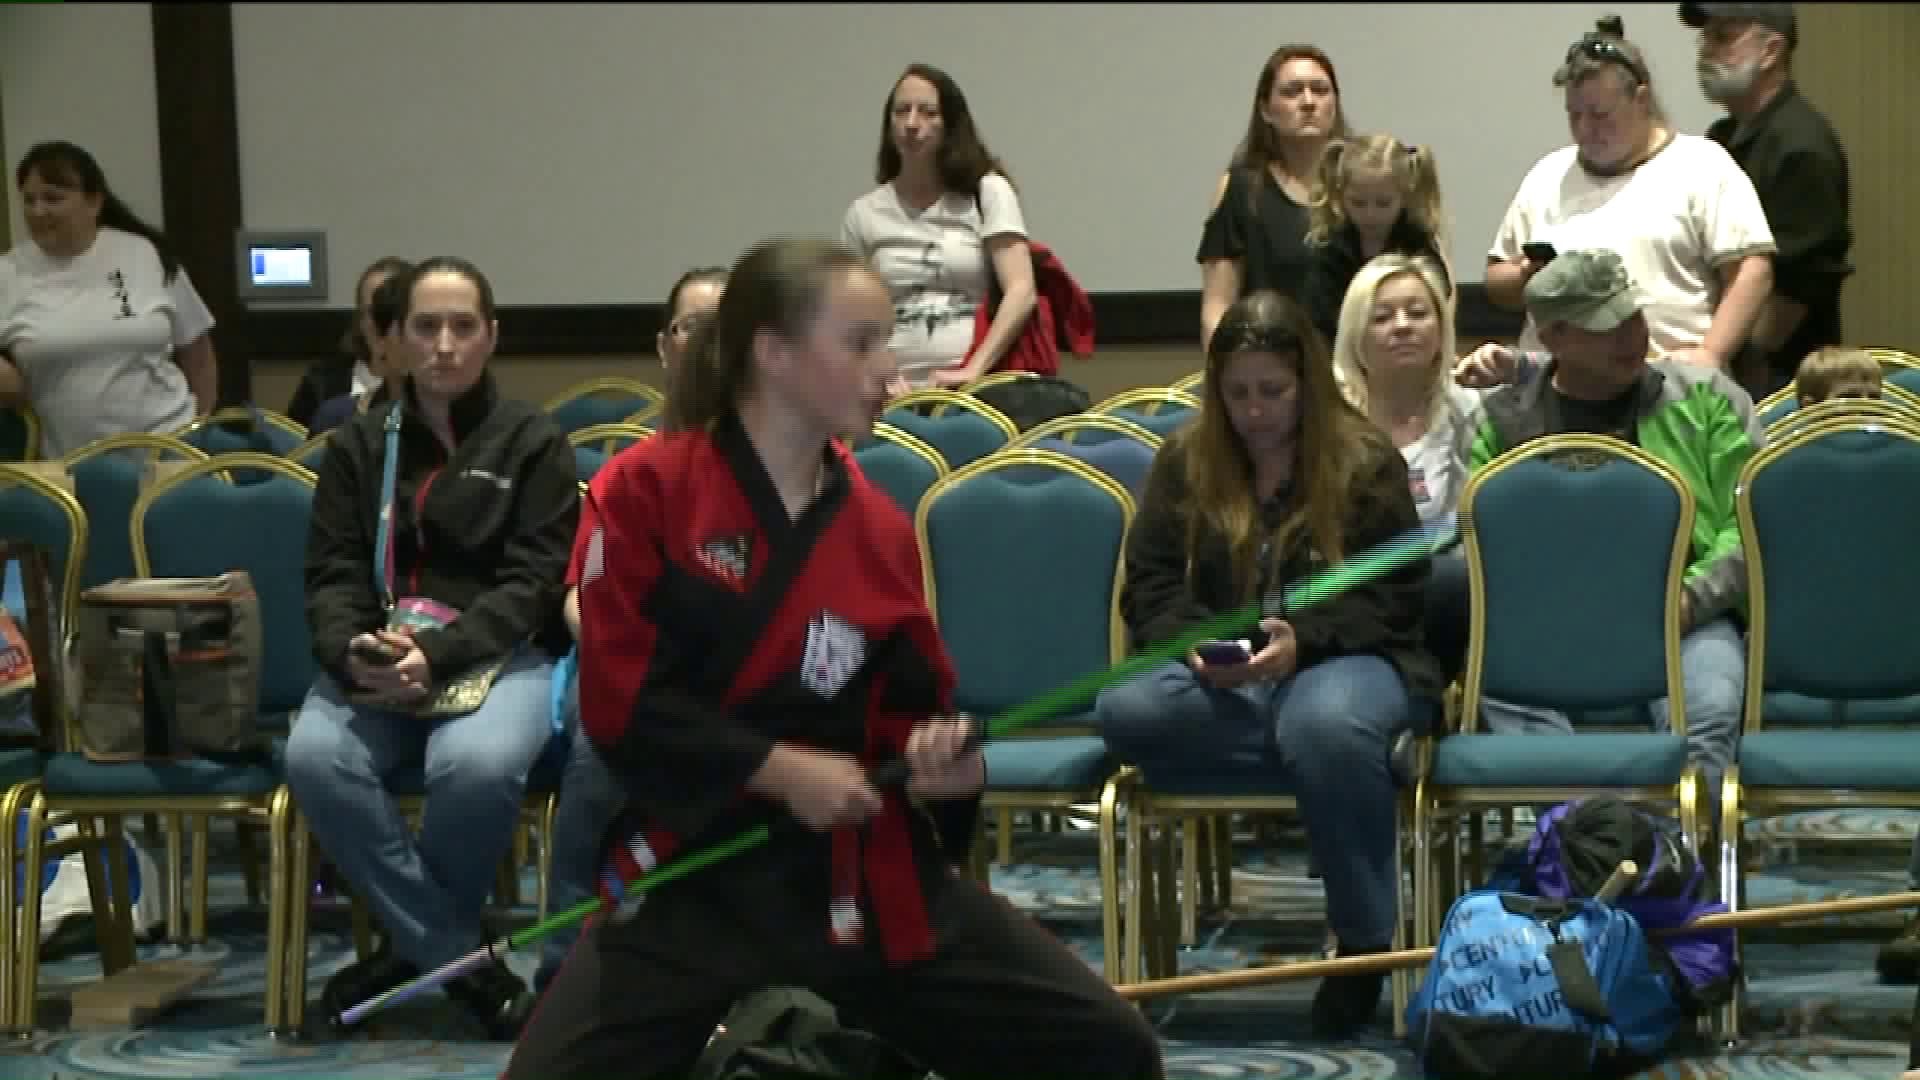 Wyoming Valley Martial Arts Challenge